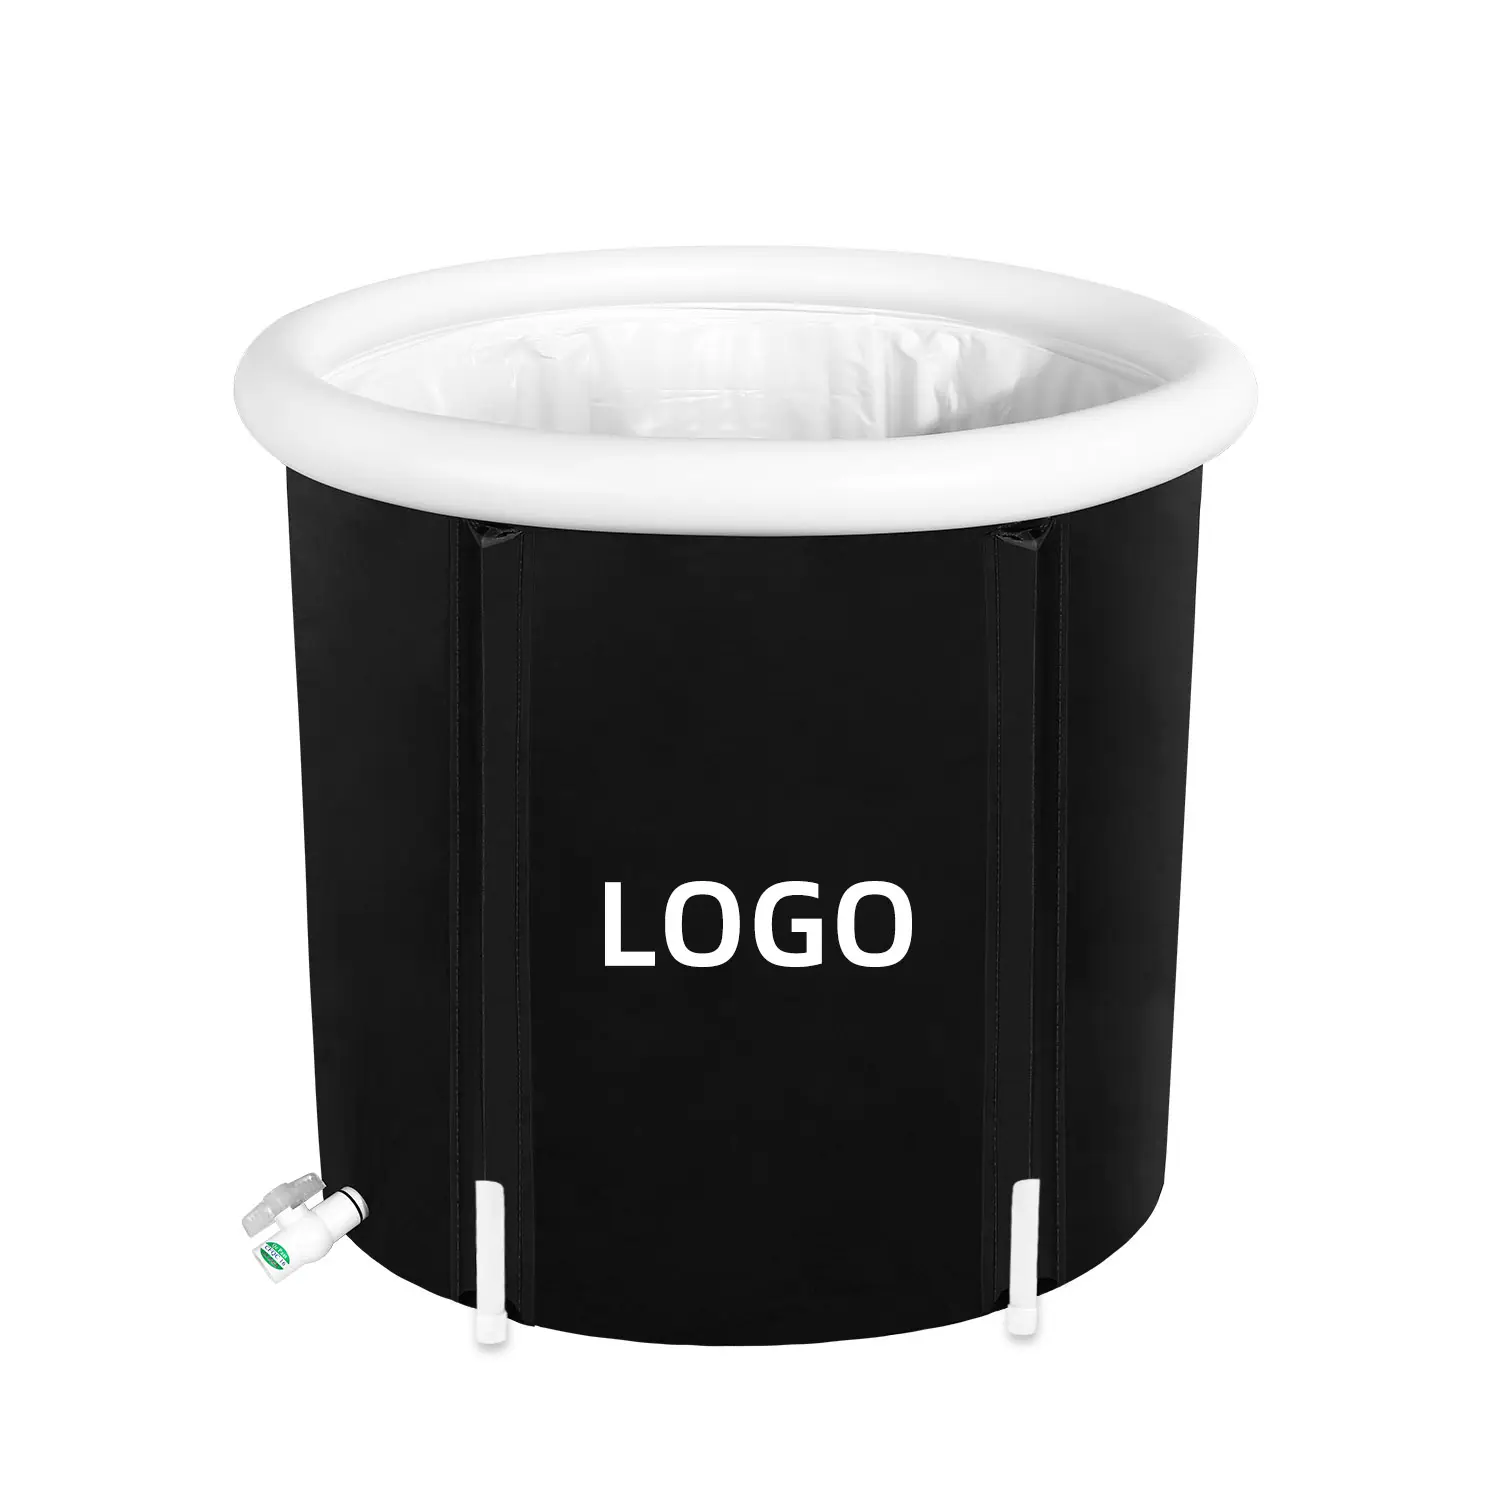 hot selling product OEM logo customized PVC material outdoor activities portable inflatable ice bath tub for adult